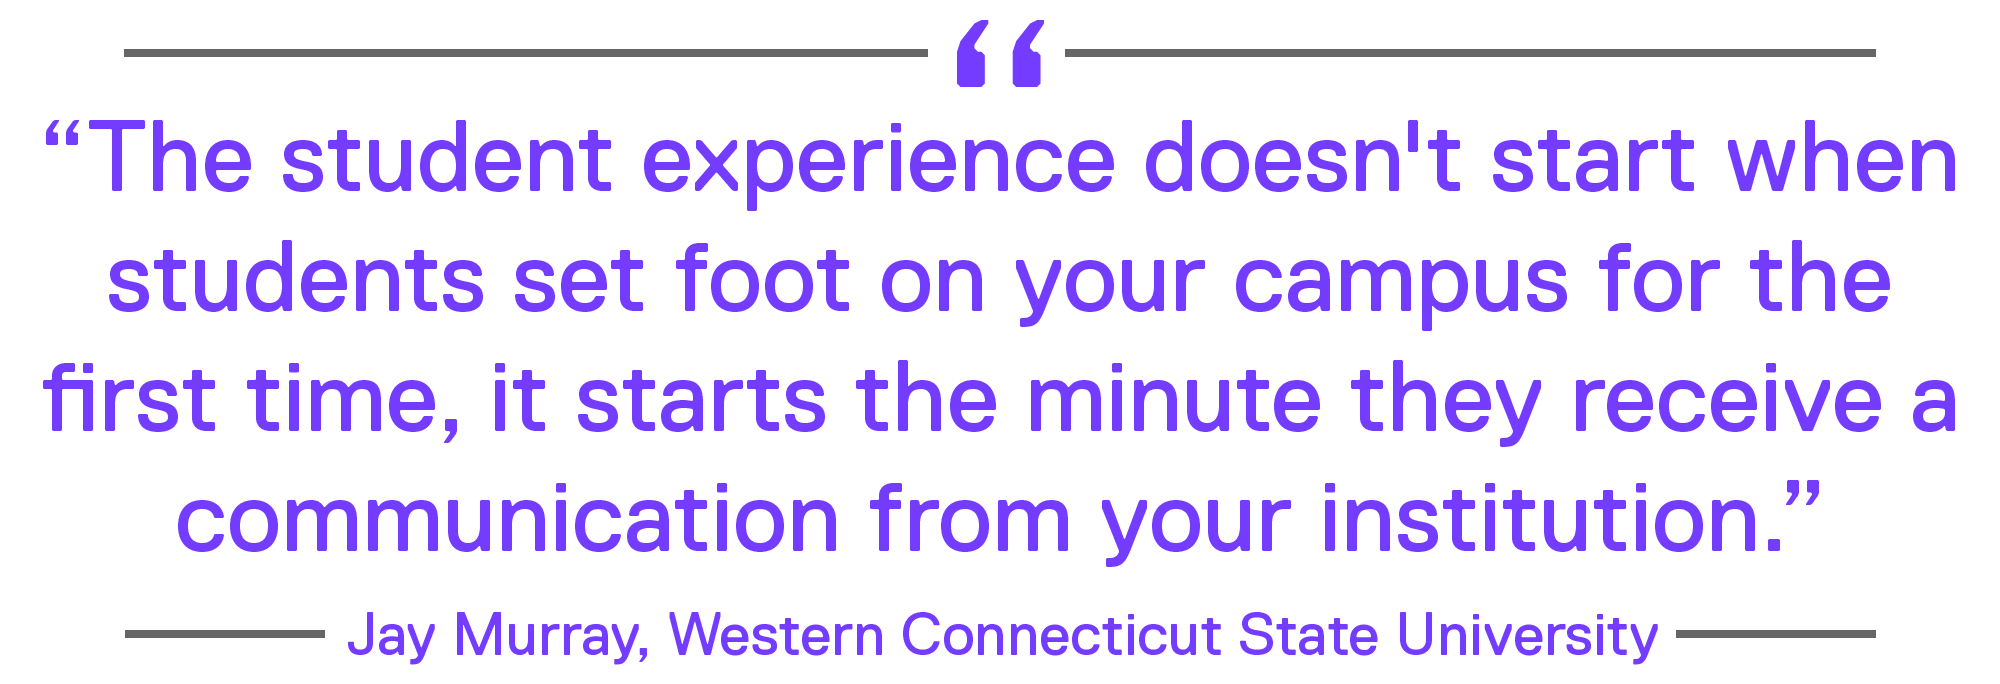 “The student experience doesn’t start when students set foot on your campus for the first time, it starts the minute they receive a communication from your institution.” – Jay Murray, Western Connecticut State University